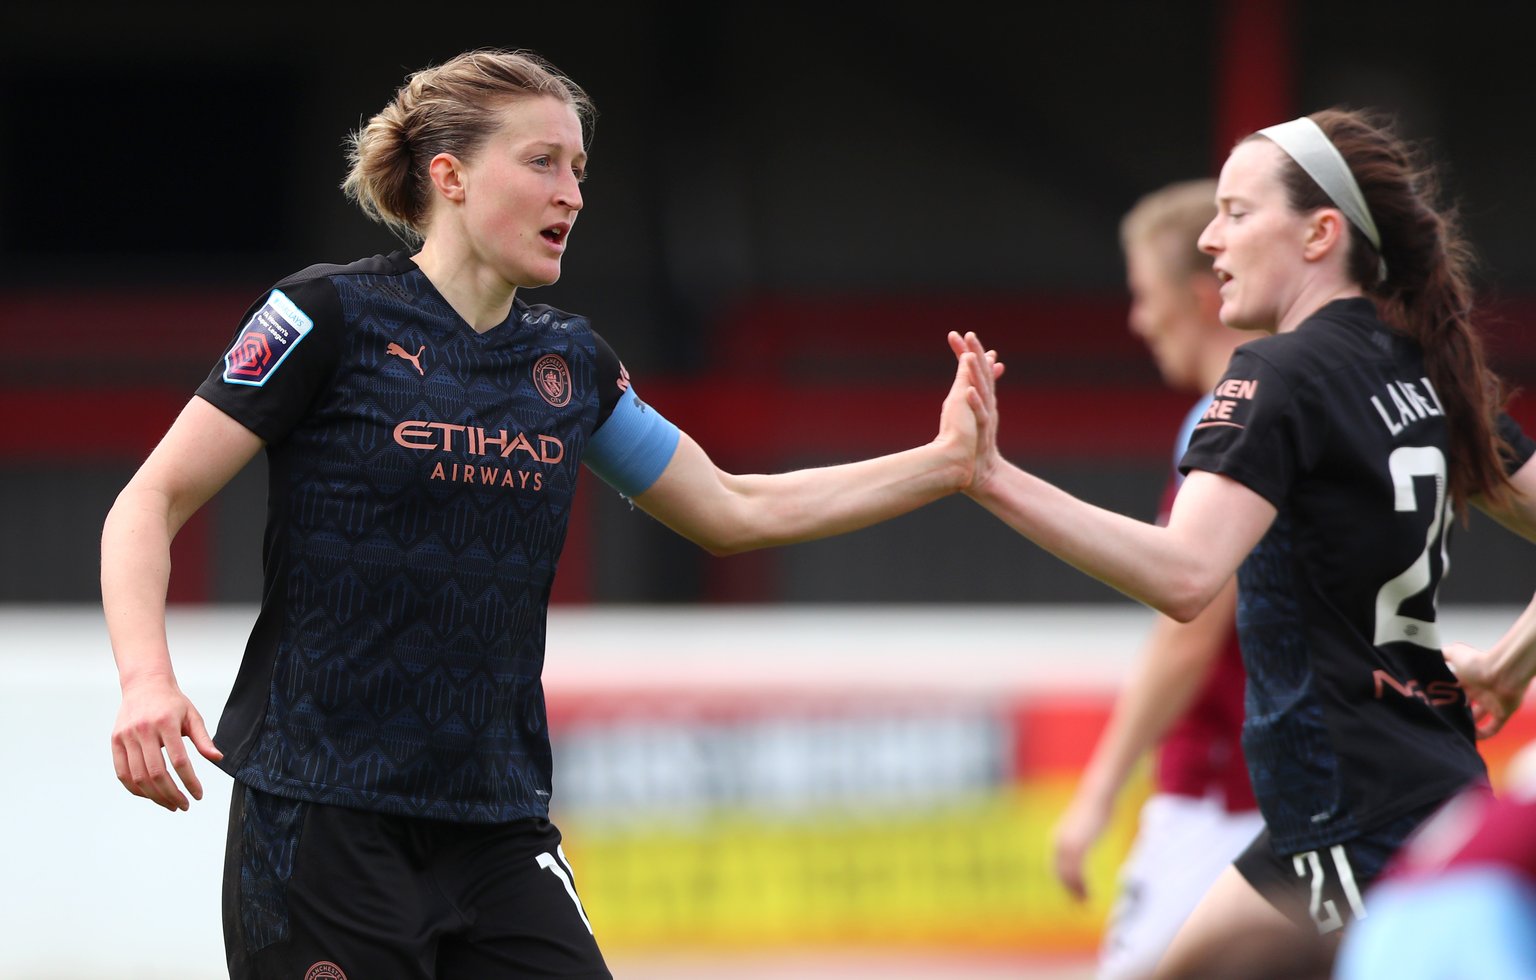 White bags birthday goal but City fall short in FA WSL title race